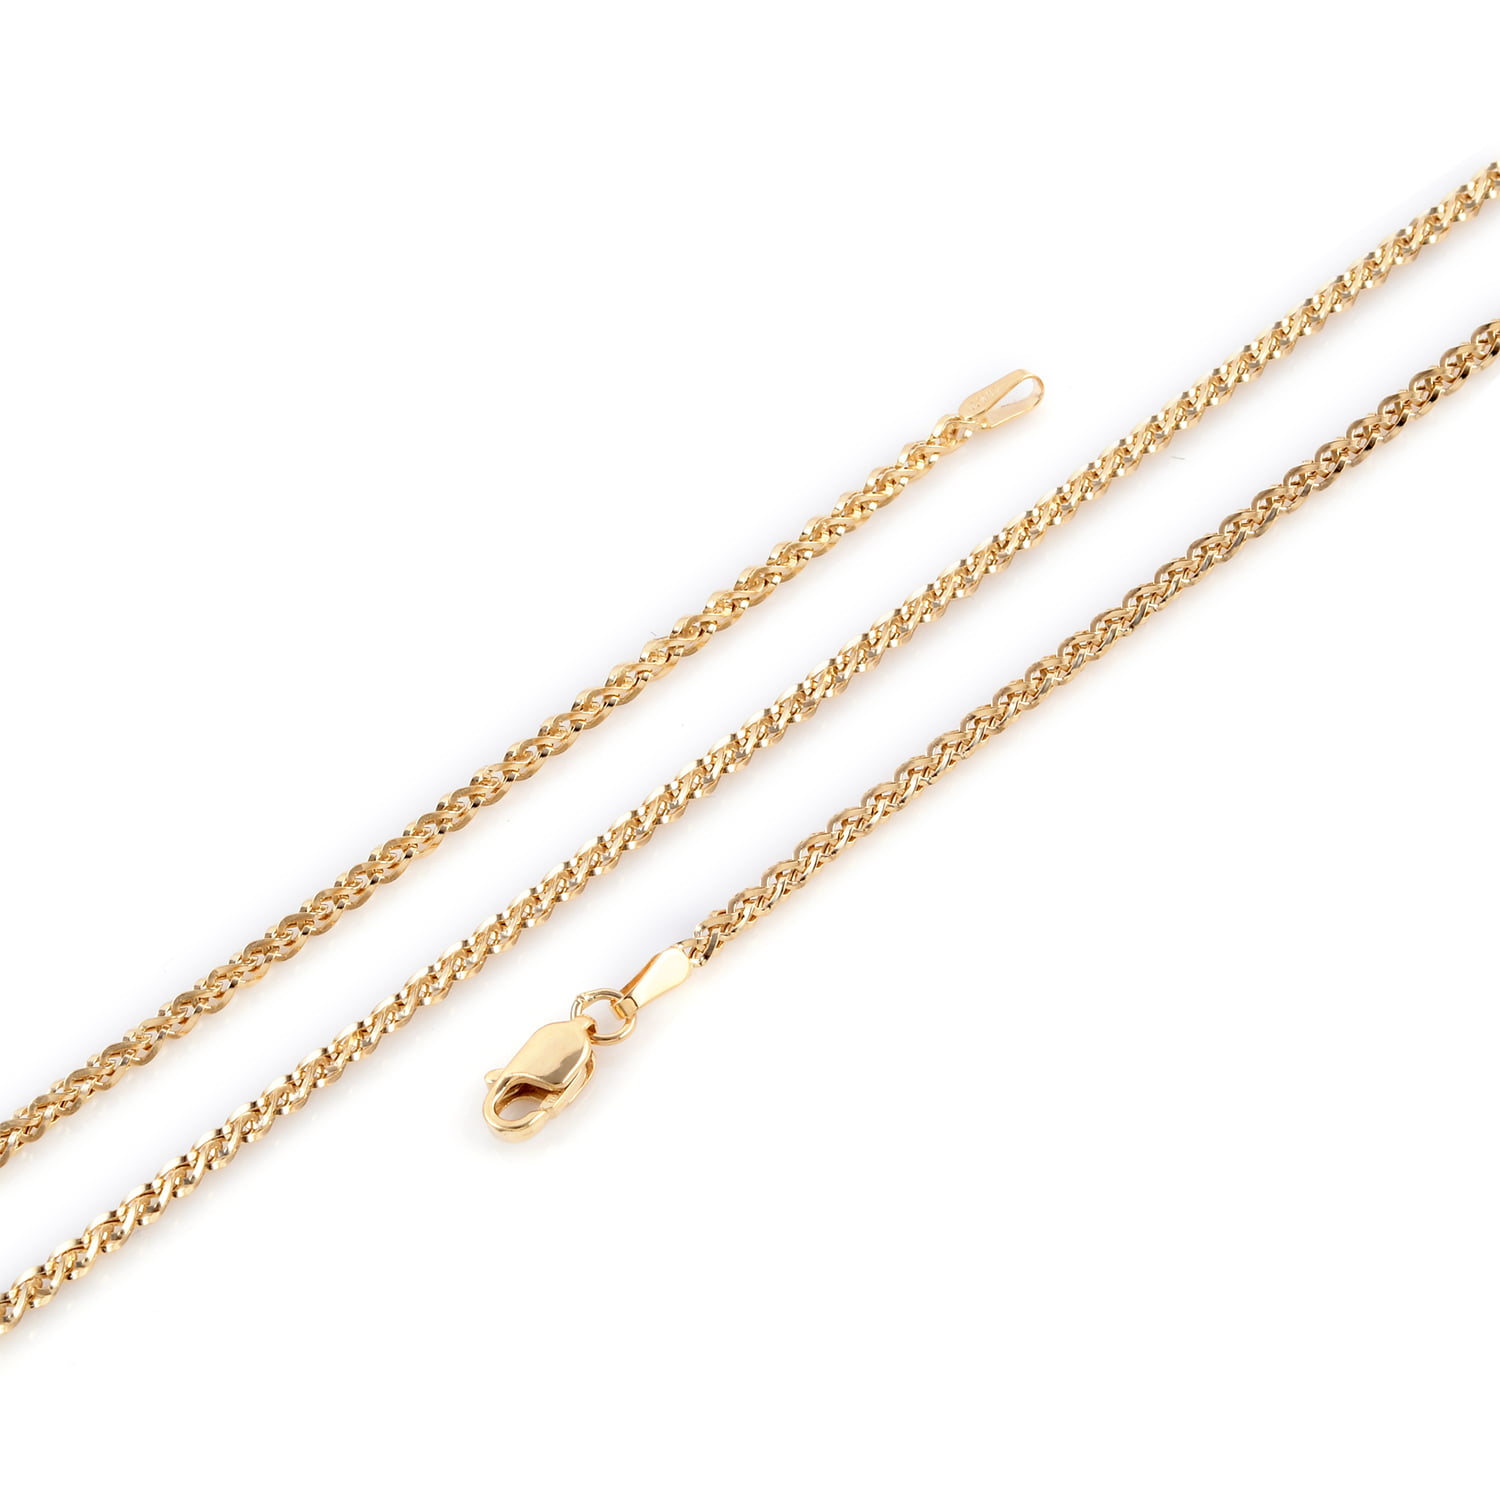 3/3.5/6/9.5mm Men Braided Wheat Spiga Chain Stainless Steel Necklace Gold Plated 